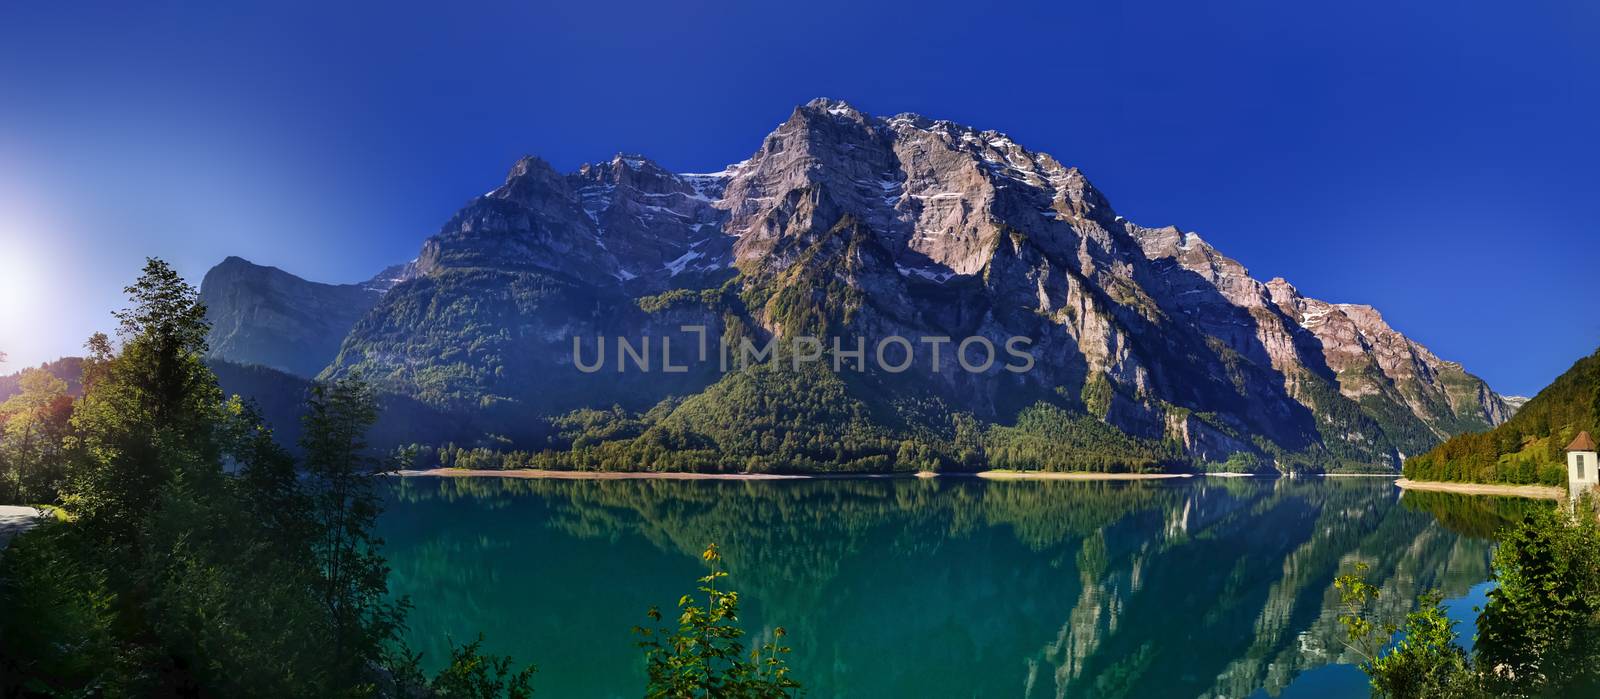 Swiss mountains and Lake. Scenic Alps and lane view. Trekking an by PeterHofstetter